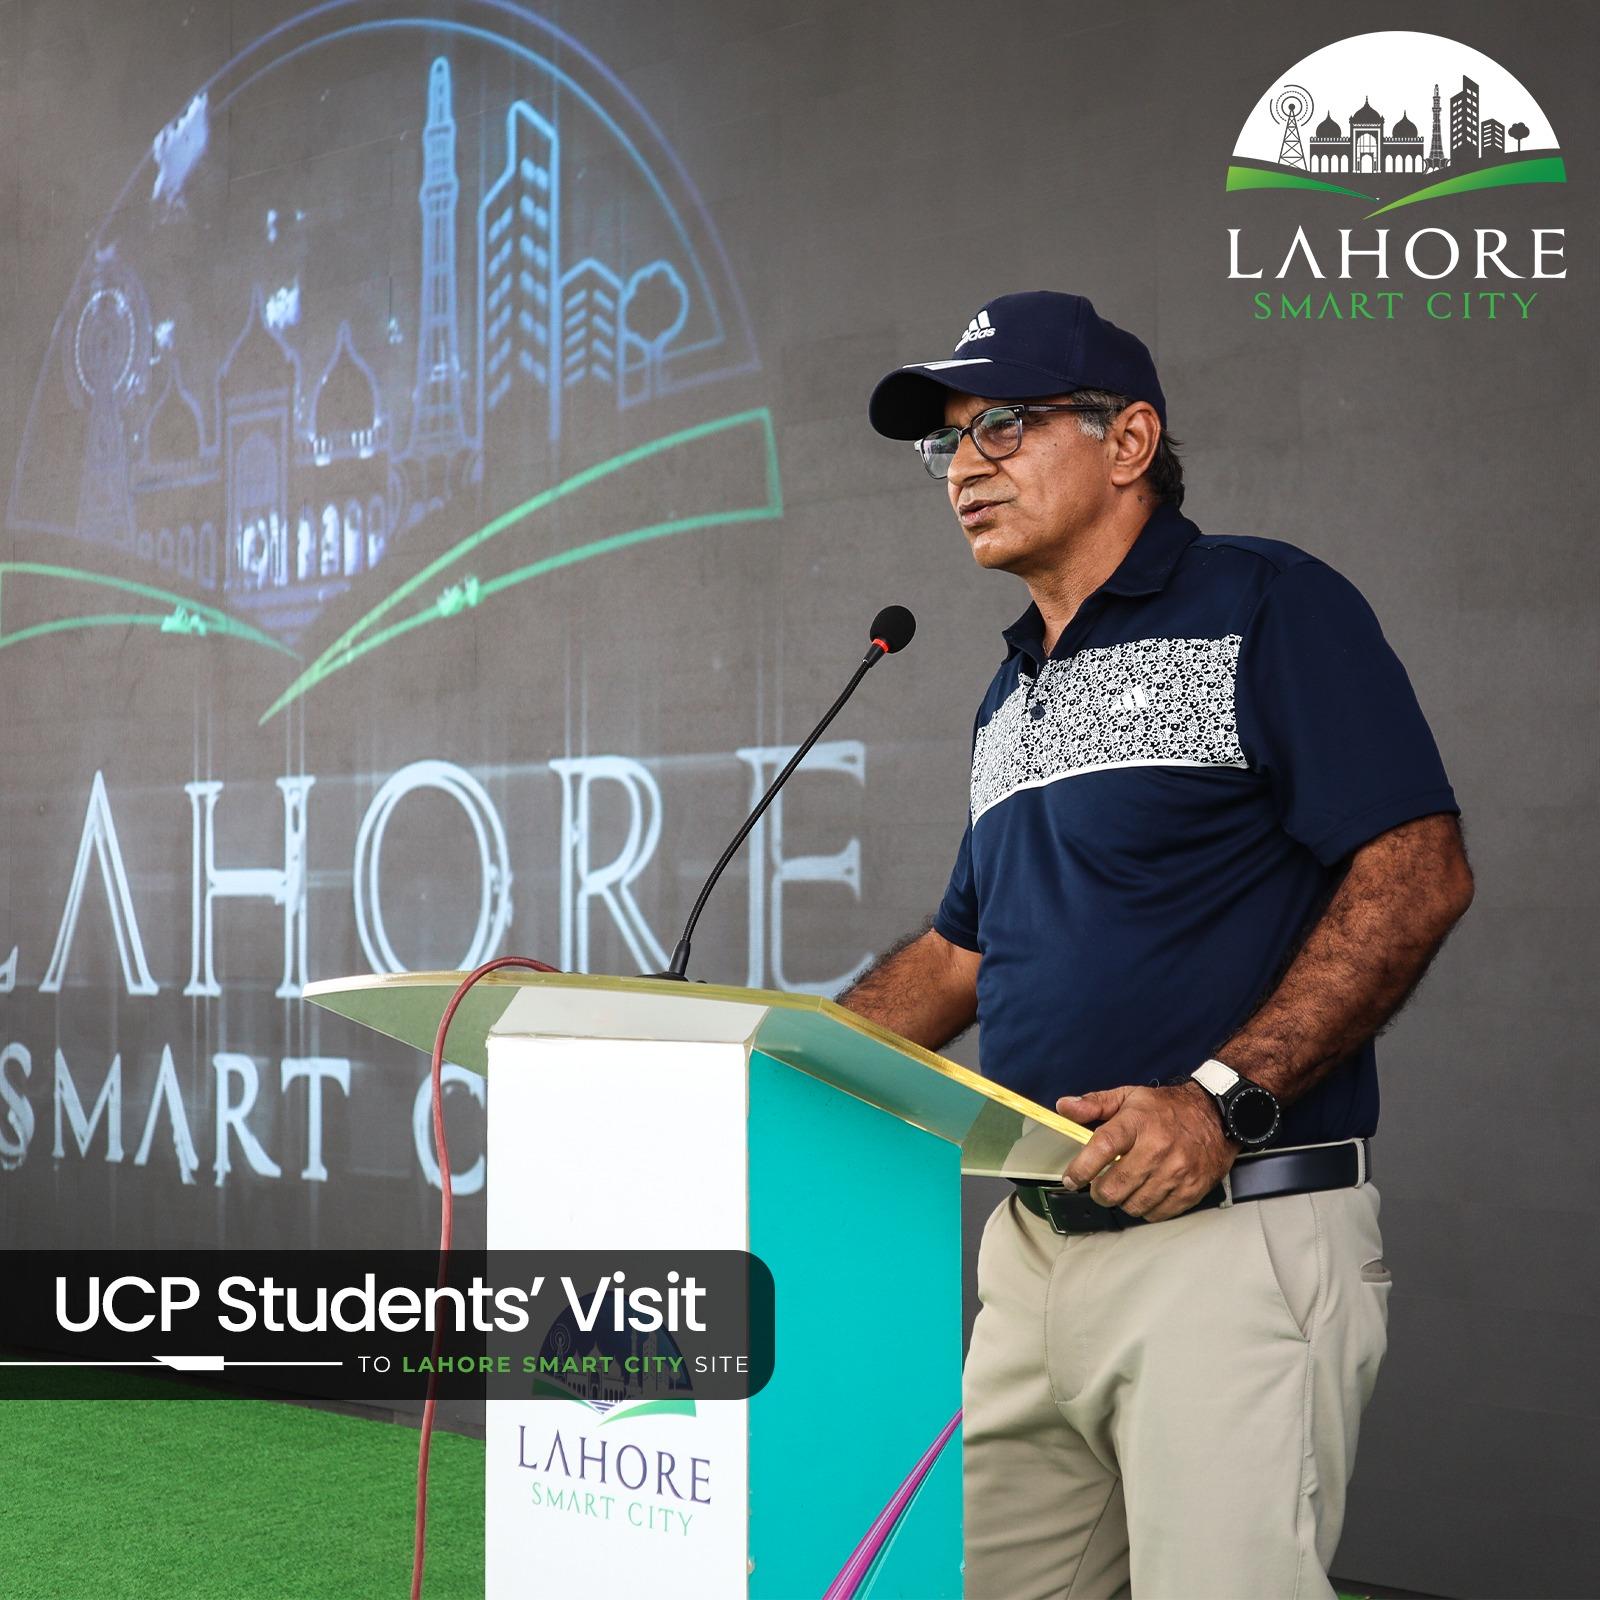 UCP students visit to the Lahore Smart City